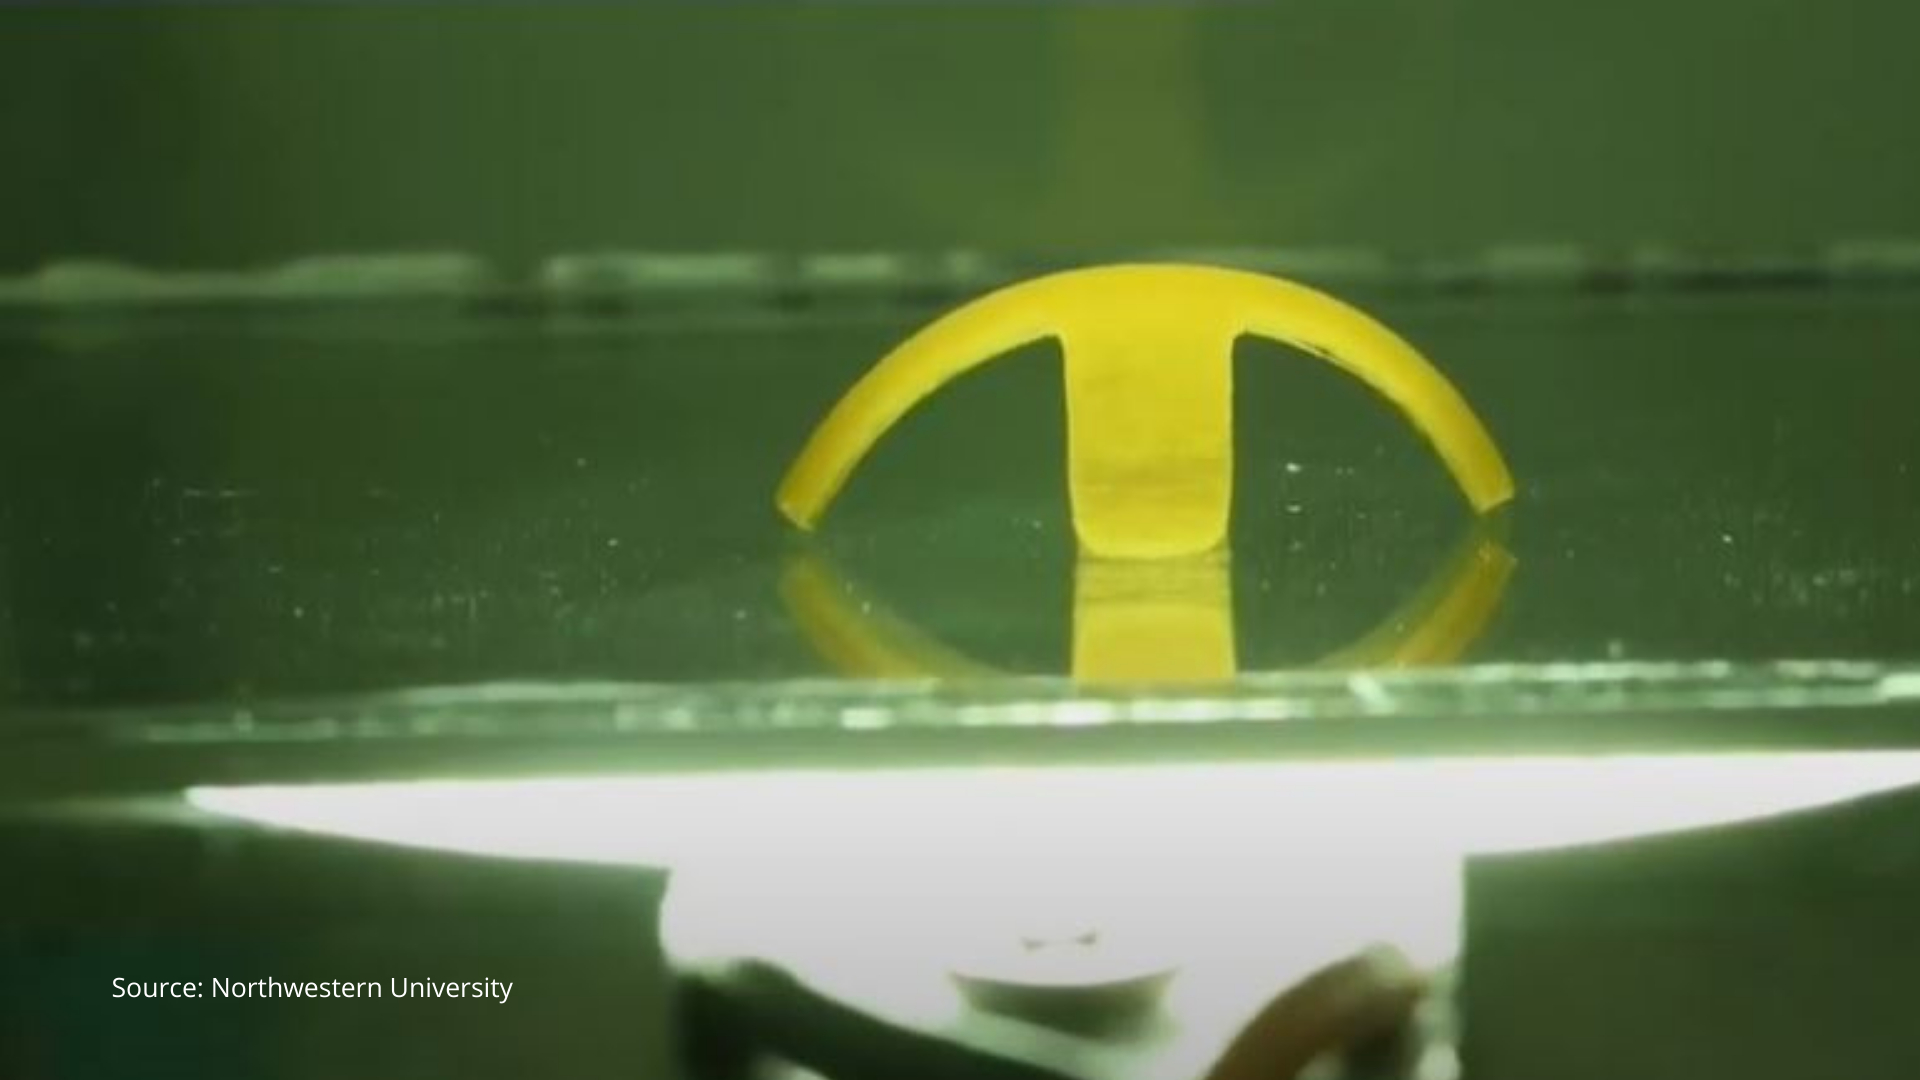 This Tech is Mind-blowing! Watch a Tiny Aquatic Robot Walk, Dance and Move Cargo